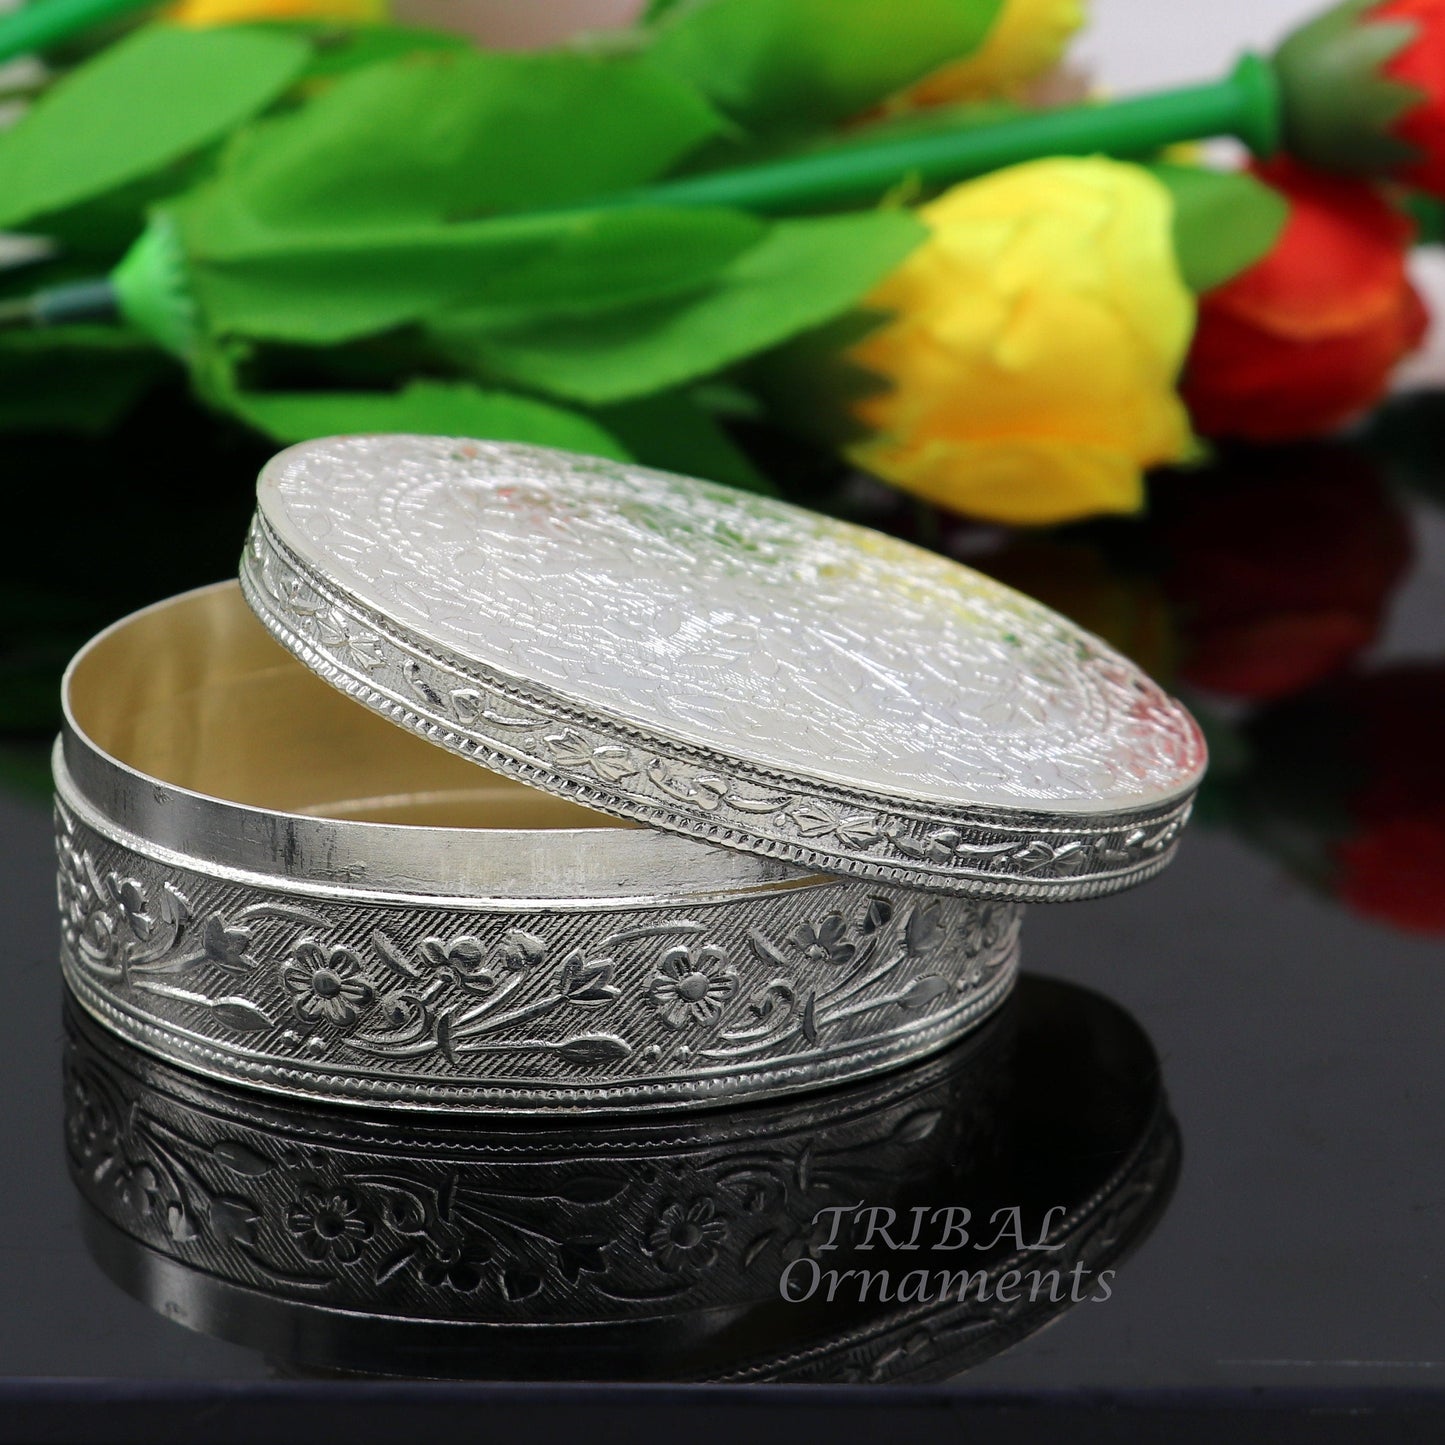 925 silver handmade oval shape trinket box brides jewelry box or dry fruit box candy box luxury gifting ideas or unique collection stb410 - TRIBAL ORNAMENTS